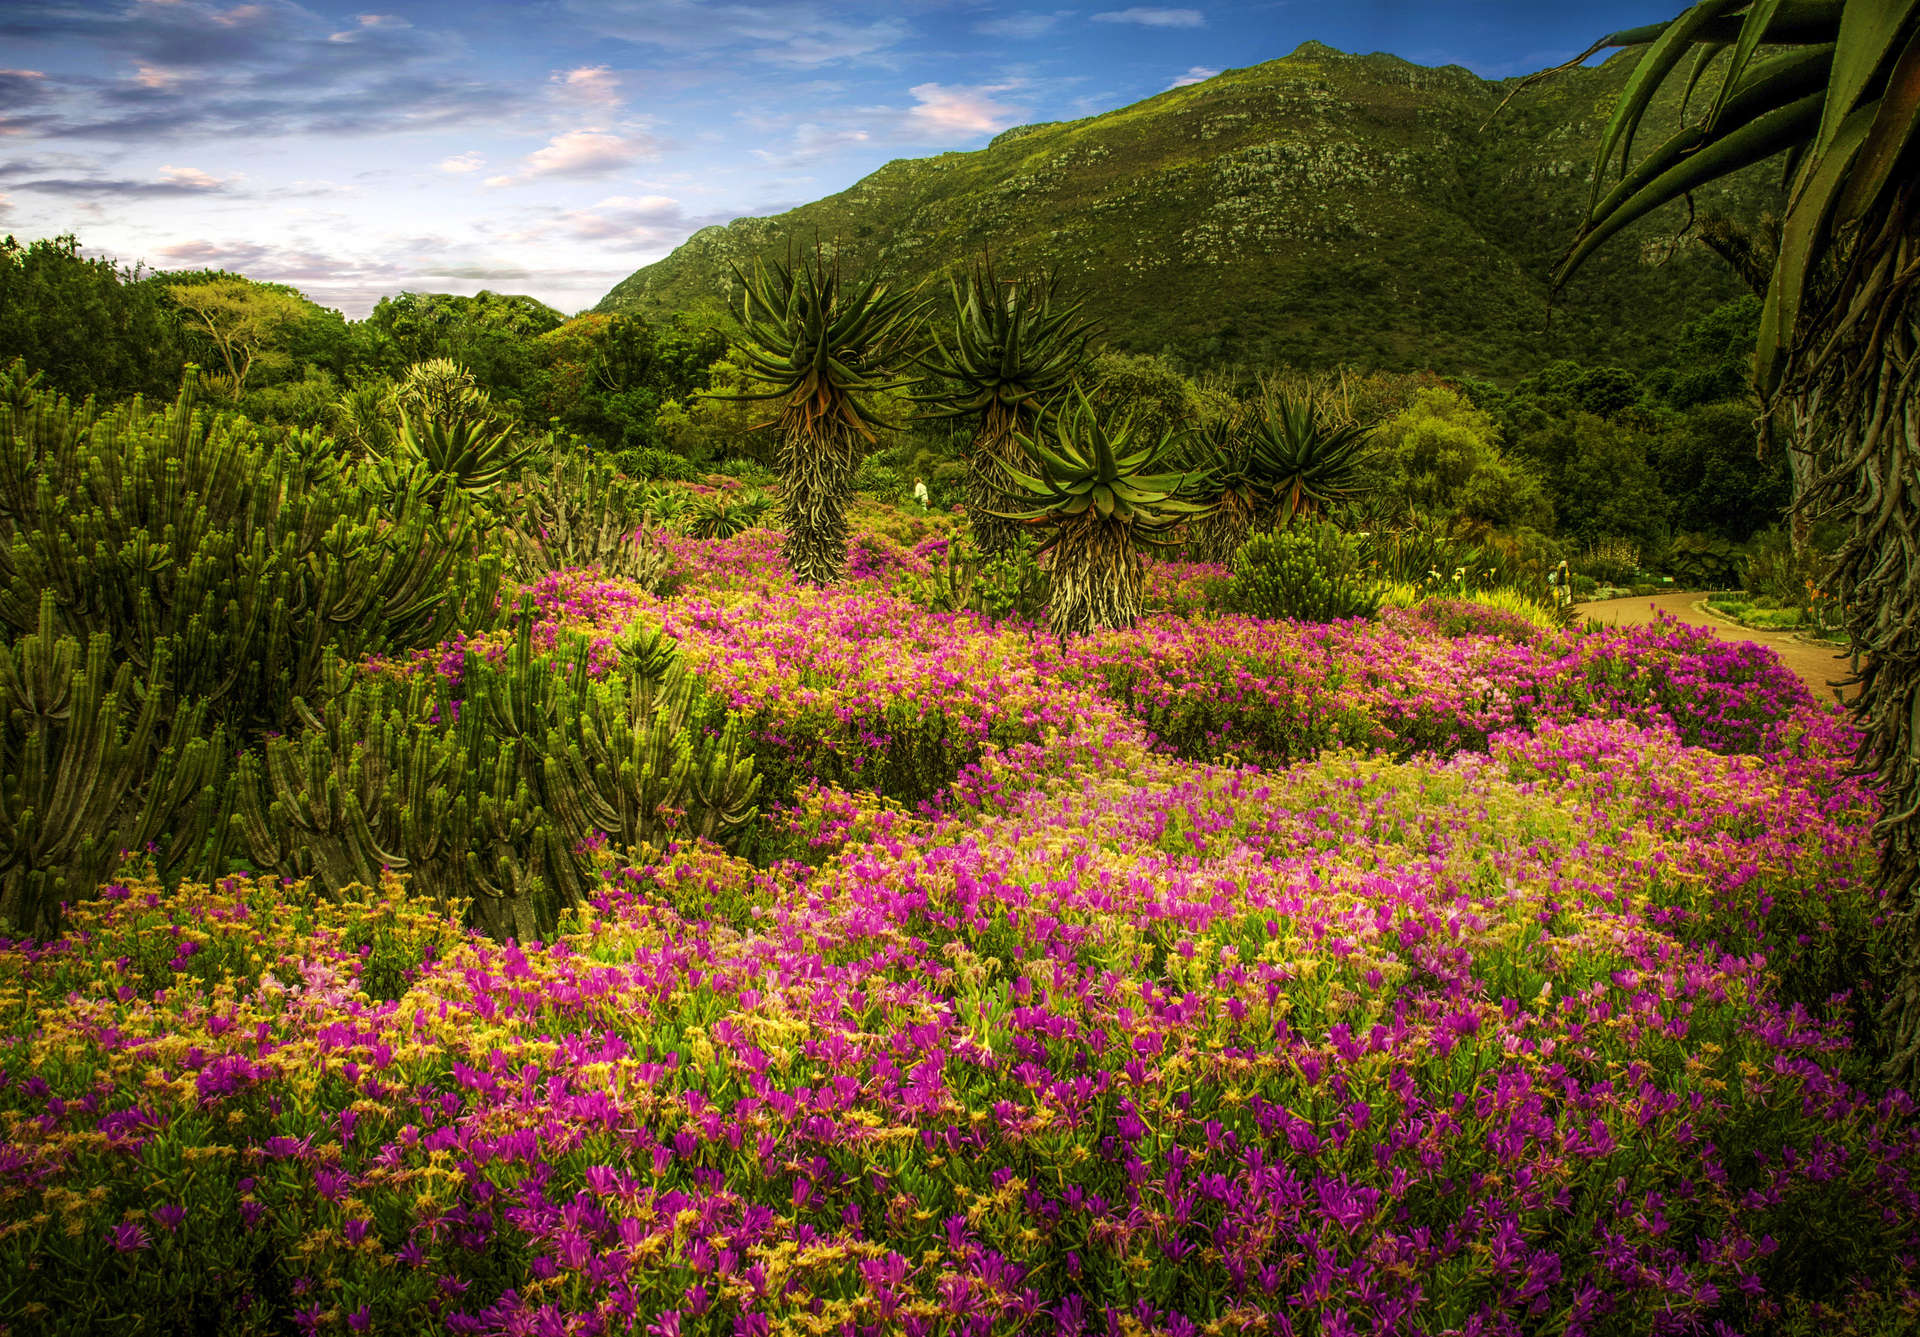 Typical St. African lanscape with flowers and palm trees.